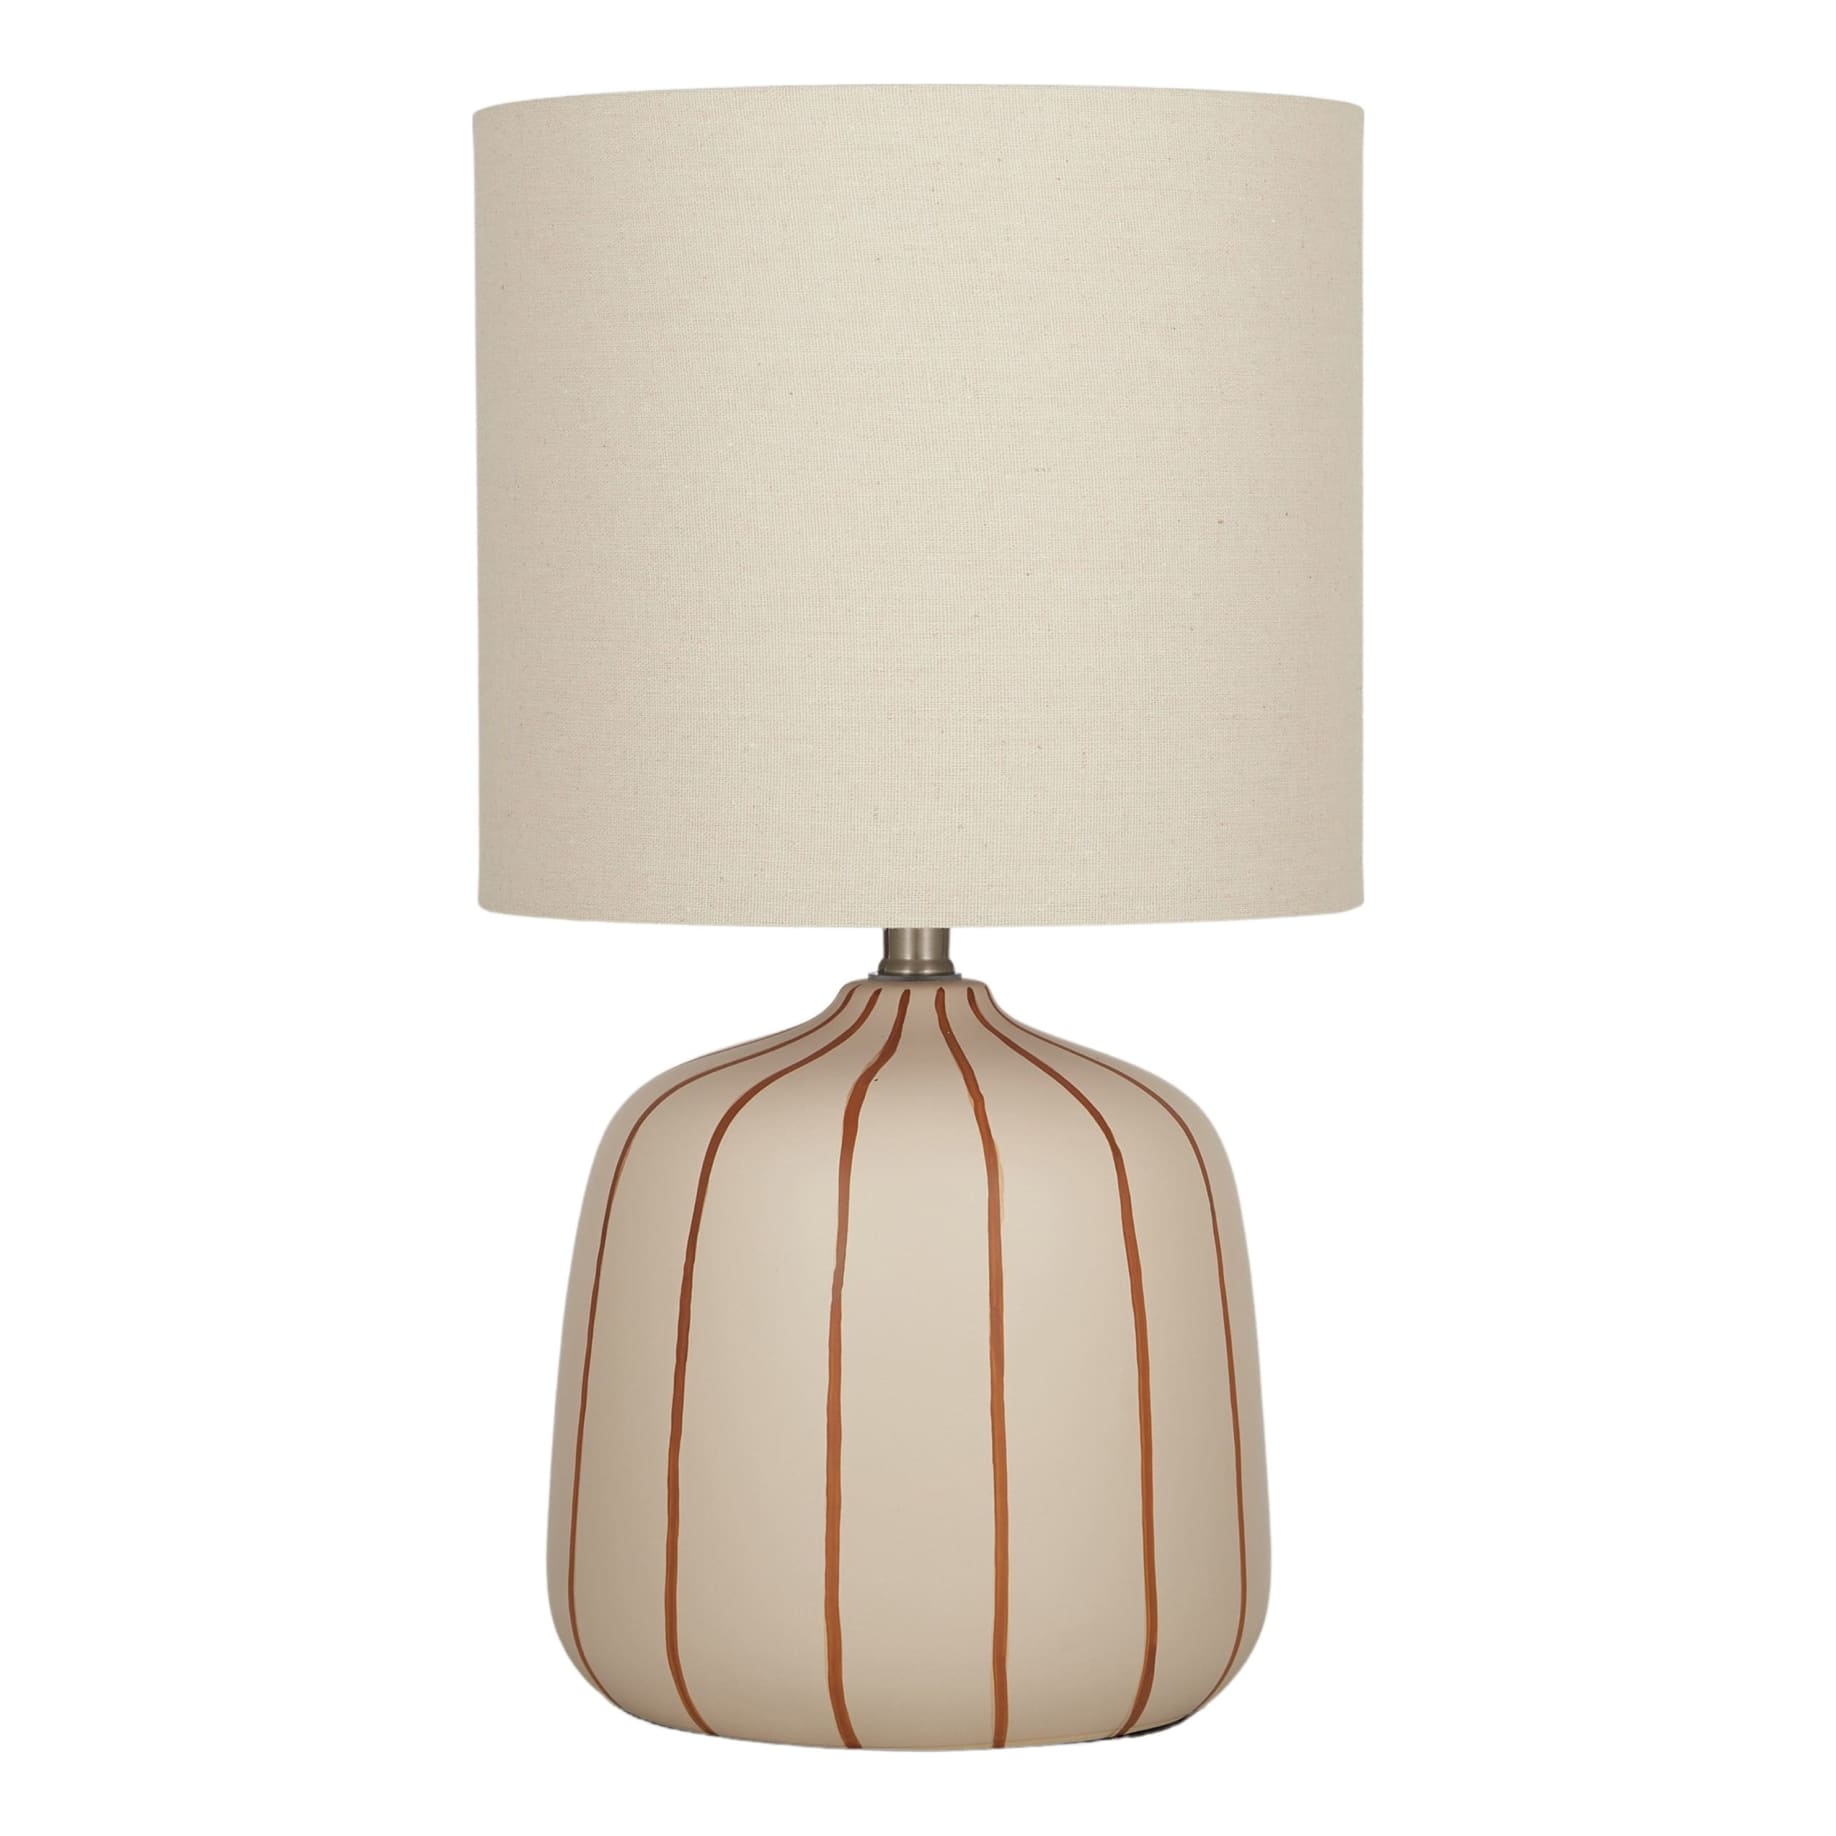 Pecan Table Lamp 28x49cm in White/Natural